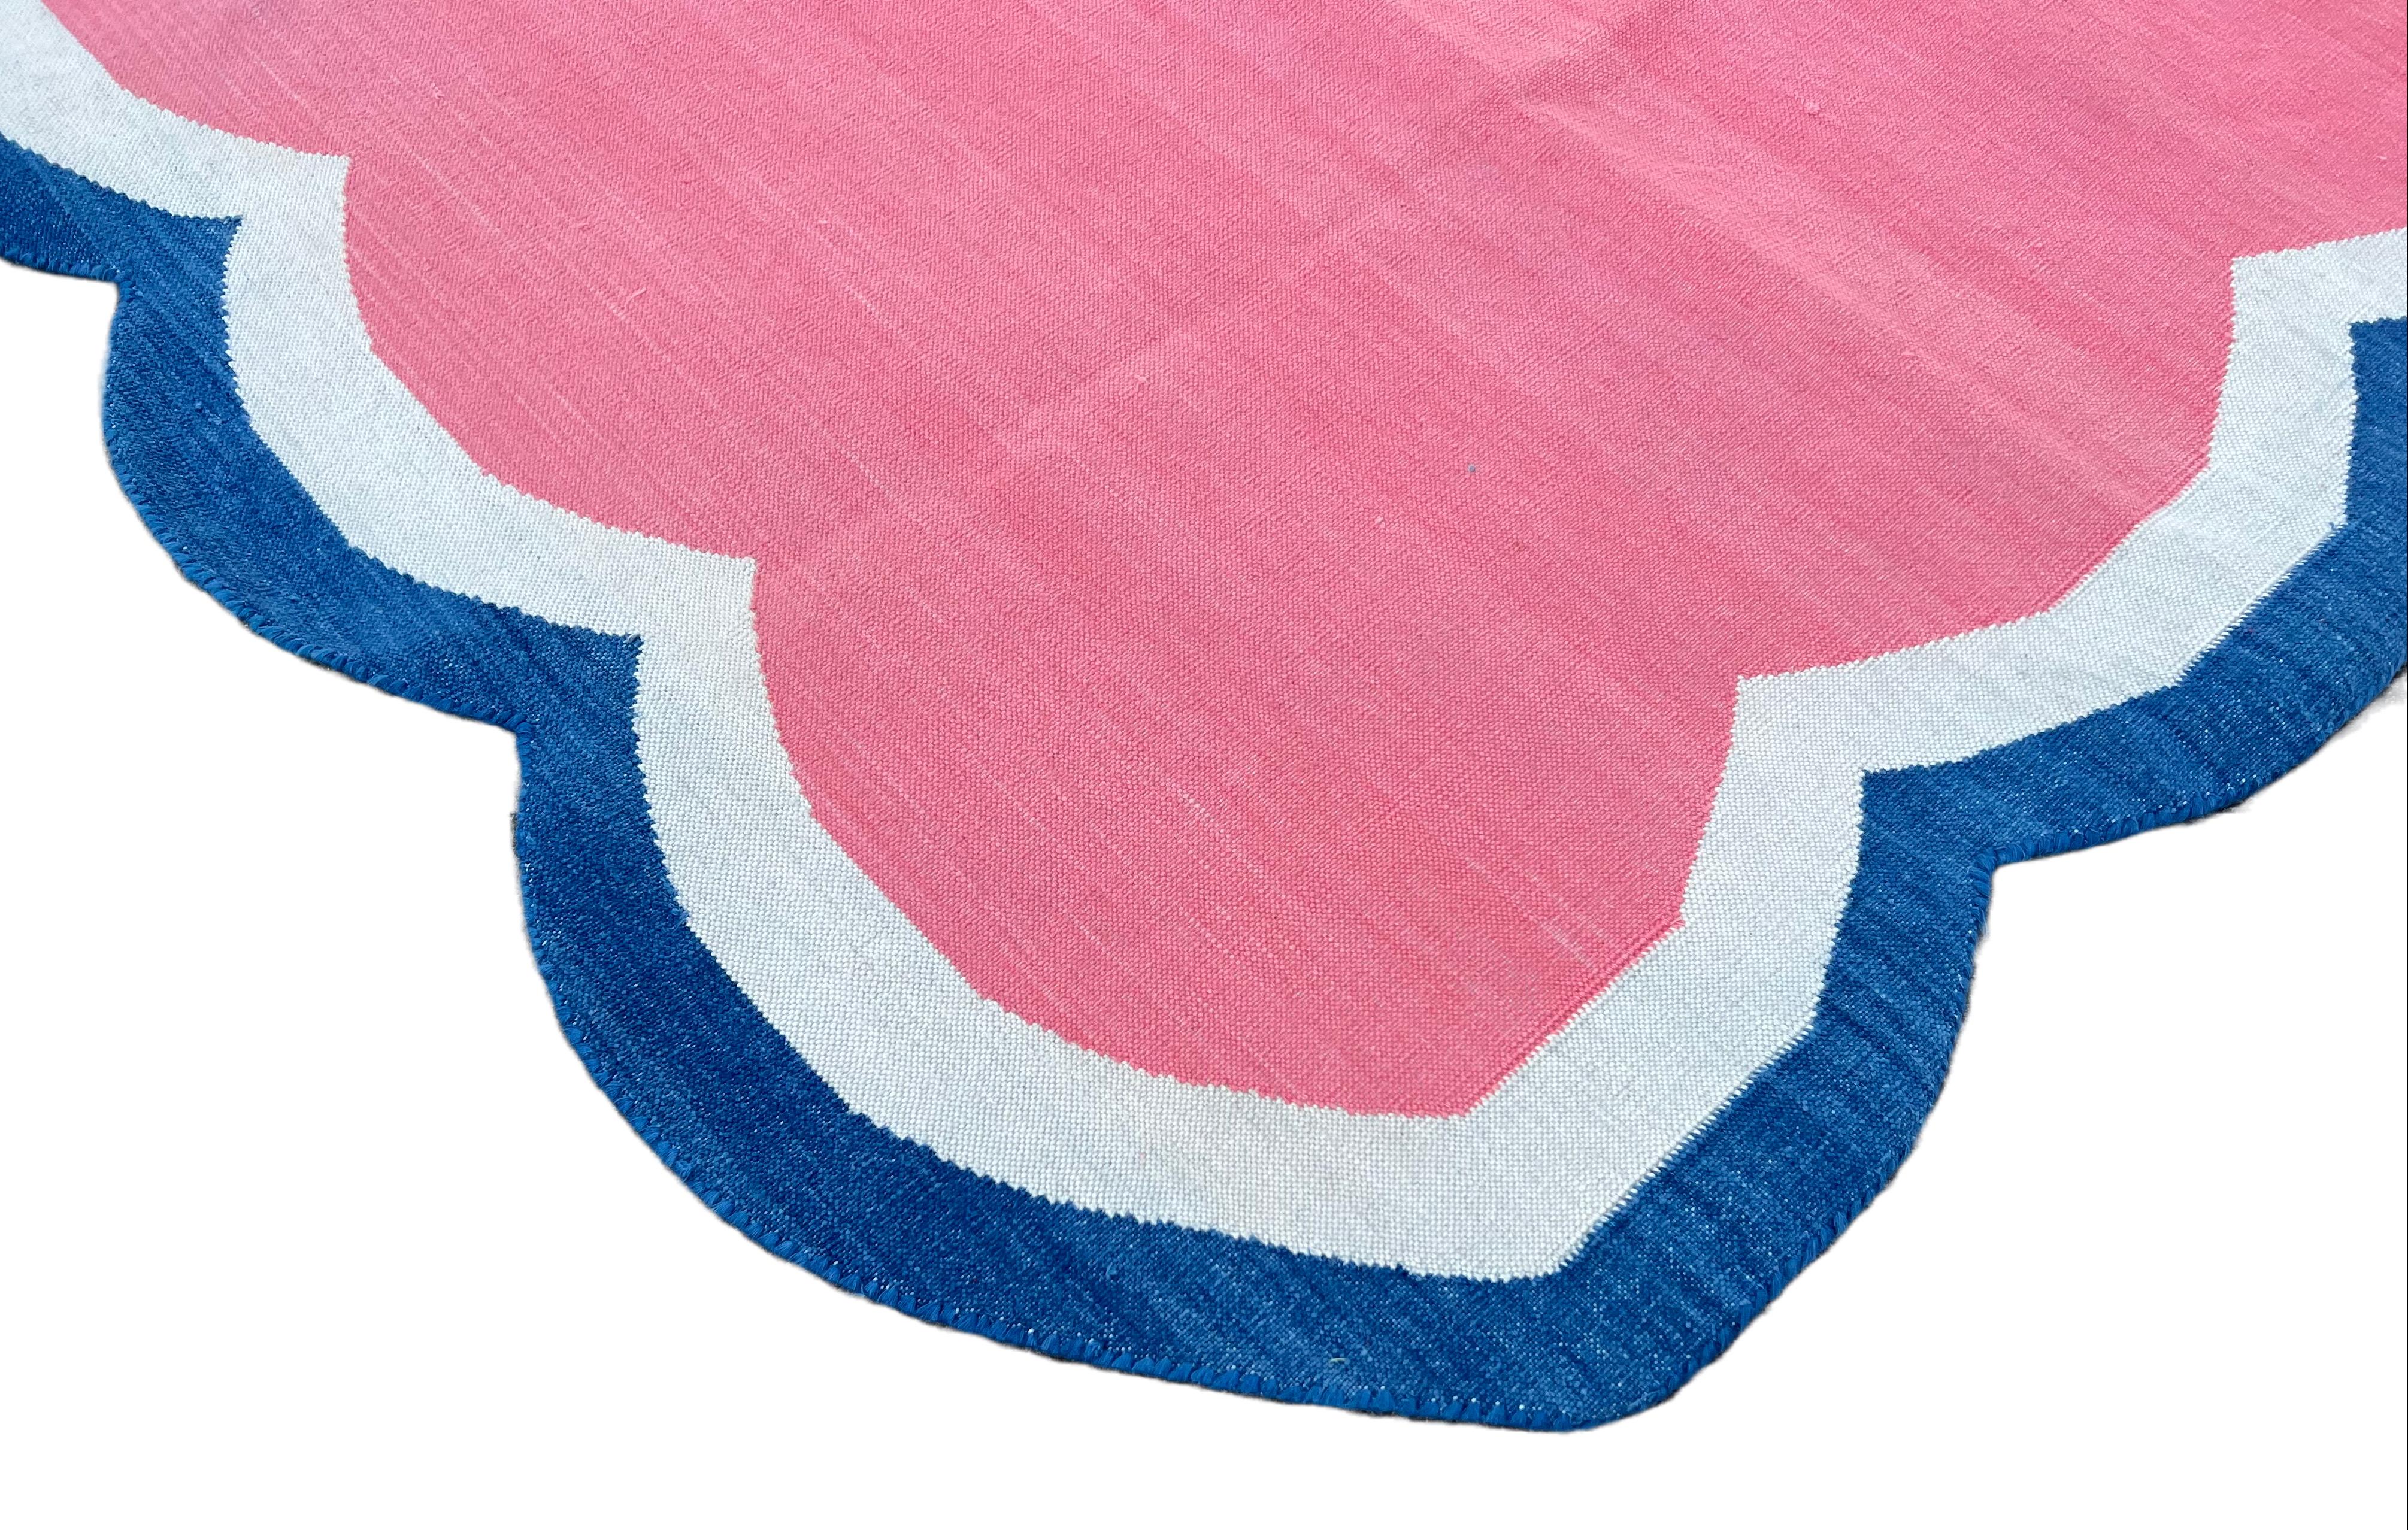 Mid-Century Modern Handmade Cotton Area Flat Weave Rug, 3x5 Pink And Blue Scalloped Kilim Dhurrie For Sale